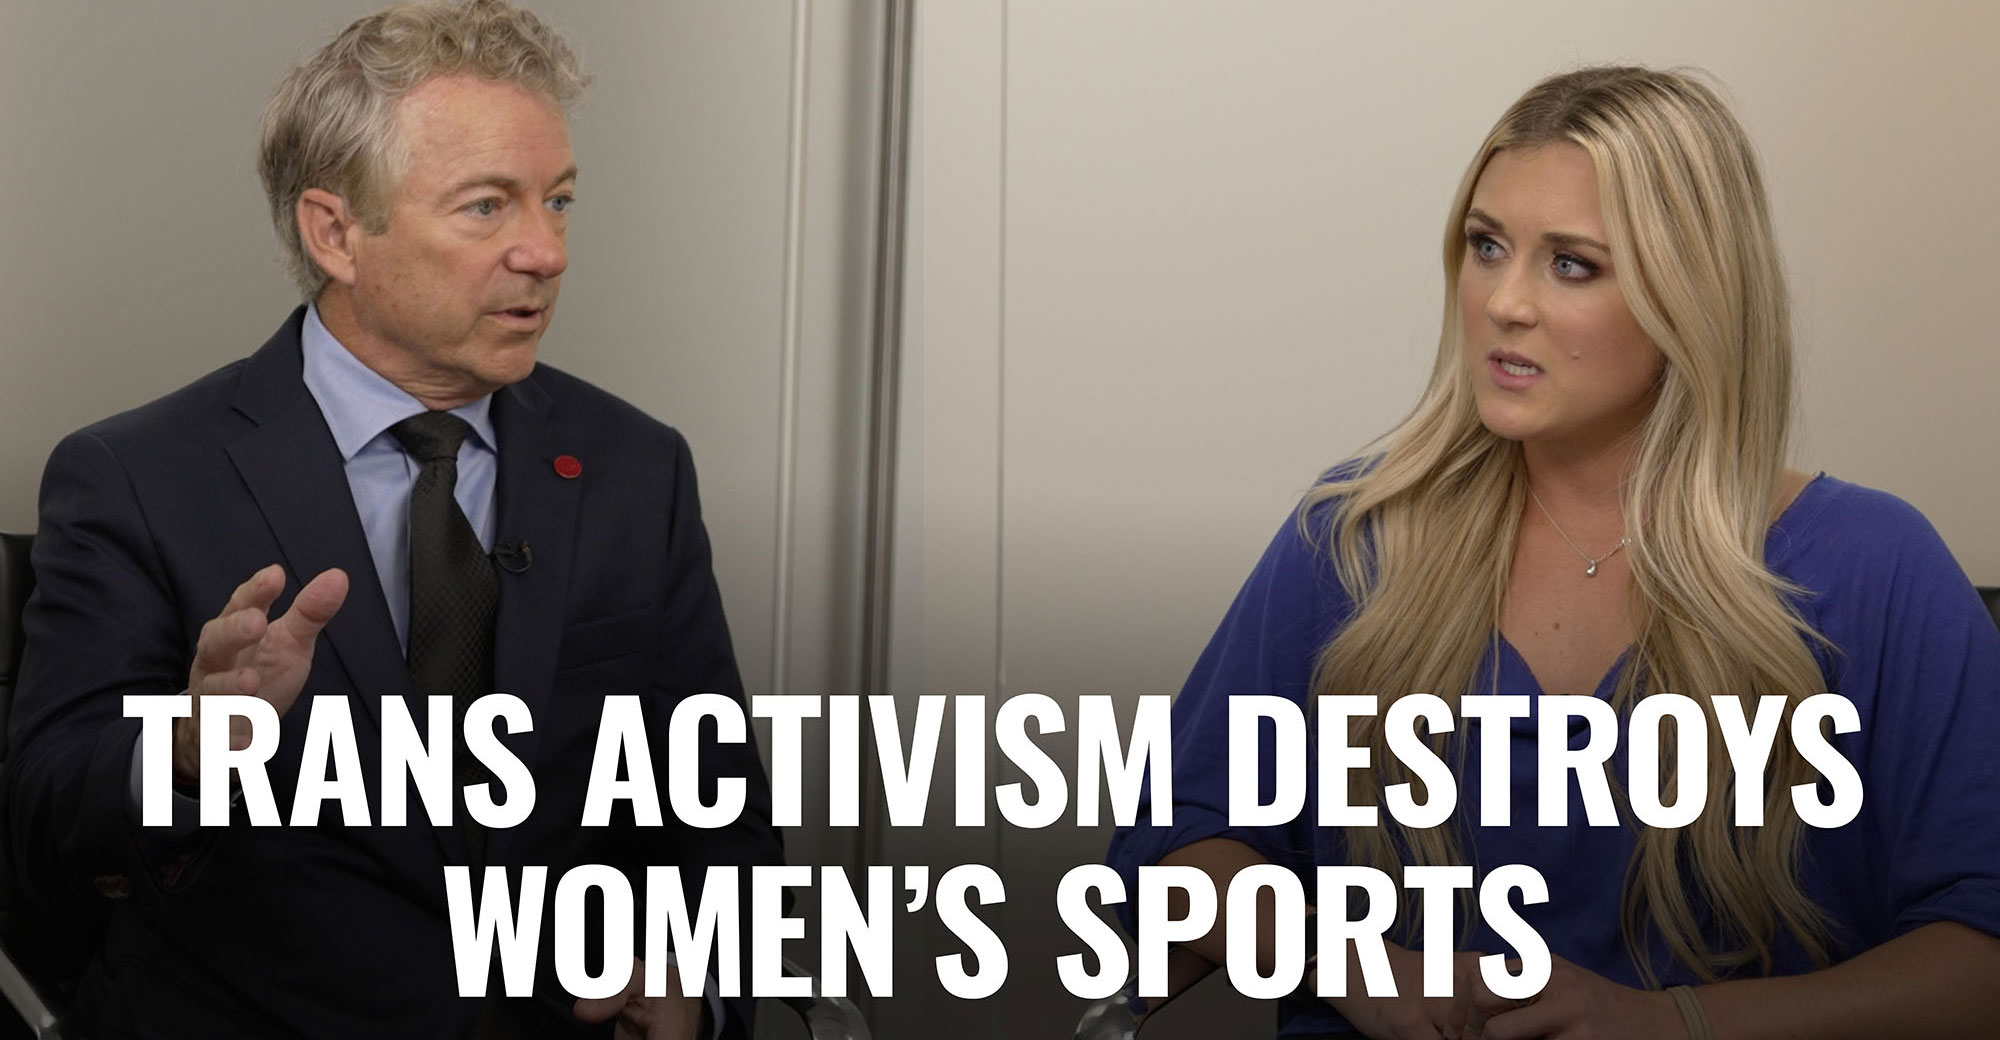 Lia Thomas Competitor Teams Up With Rand Paul to Protect Women's Sports From Transgender Activism